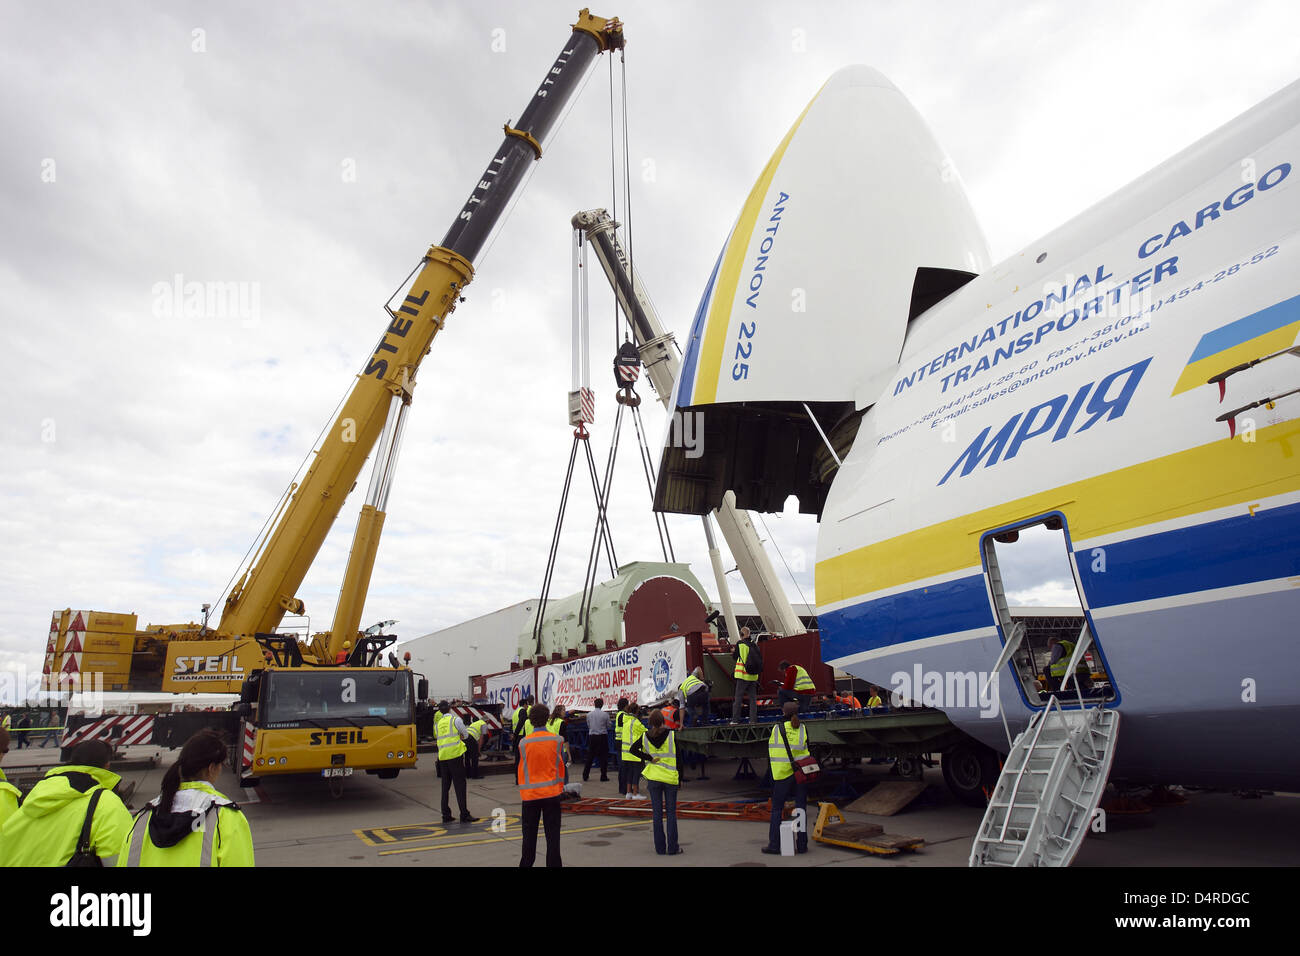 An Antonov 225 freighter plane is loaded with a generator weighing 189,98 tons designated for a gas driven power plant in Armenia, at Frankfurt/Hahn airport, Lautzenhausen, Germany, 11 August 2009. The generator is the heaviest single piece of air freight ever transported. Driven by six turbines the Antonov 225 is the world?s largest freight plane with a wingspan of more than 88m.  Stock Photo